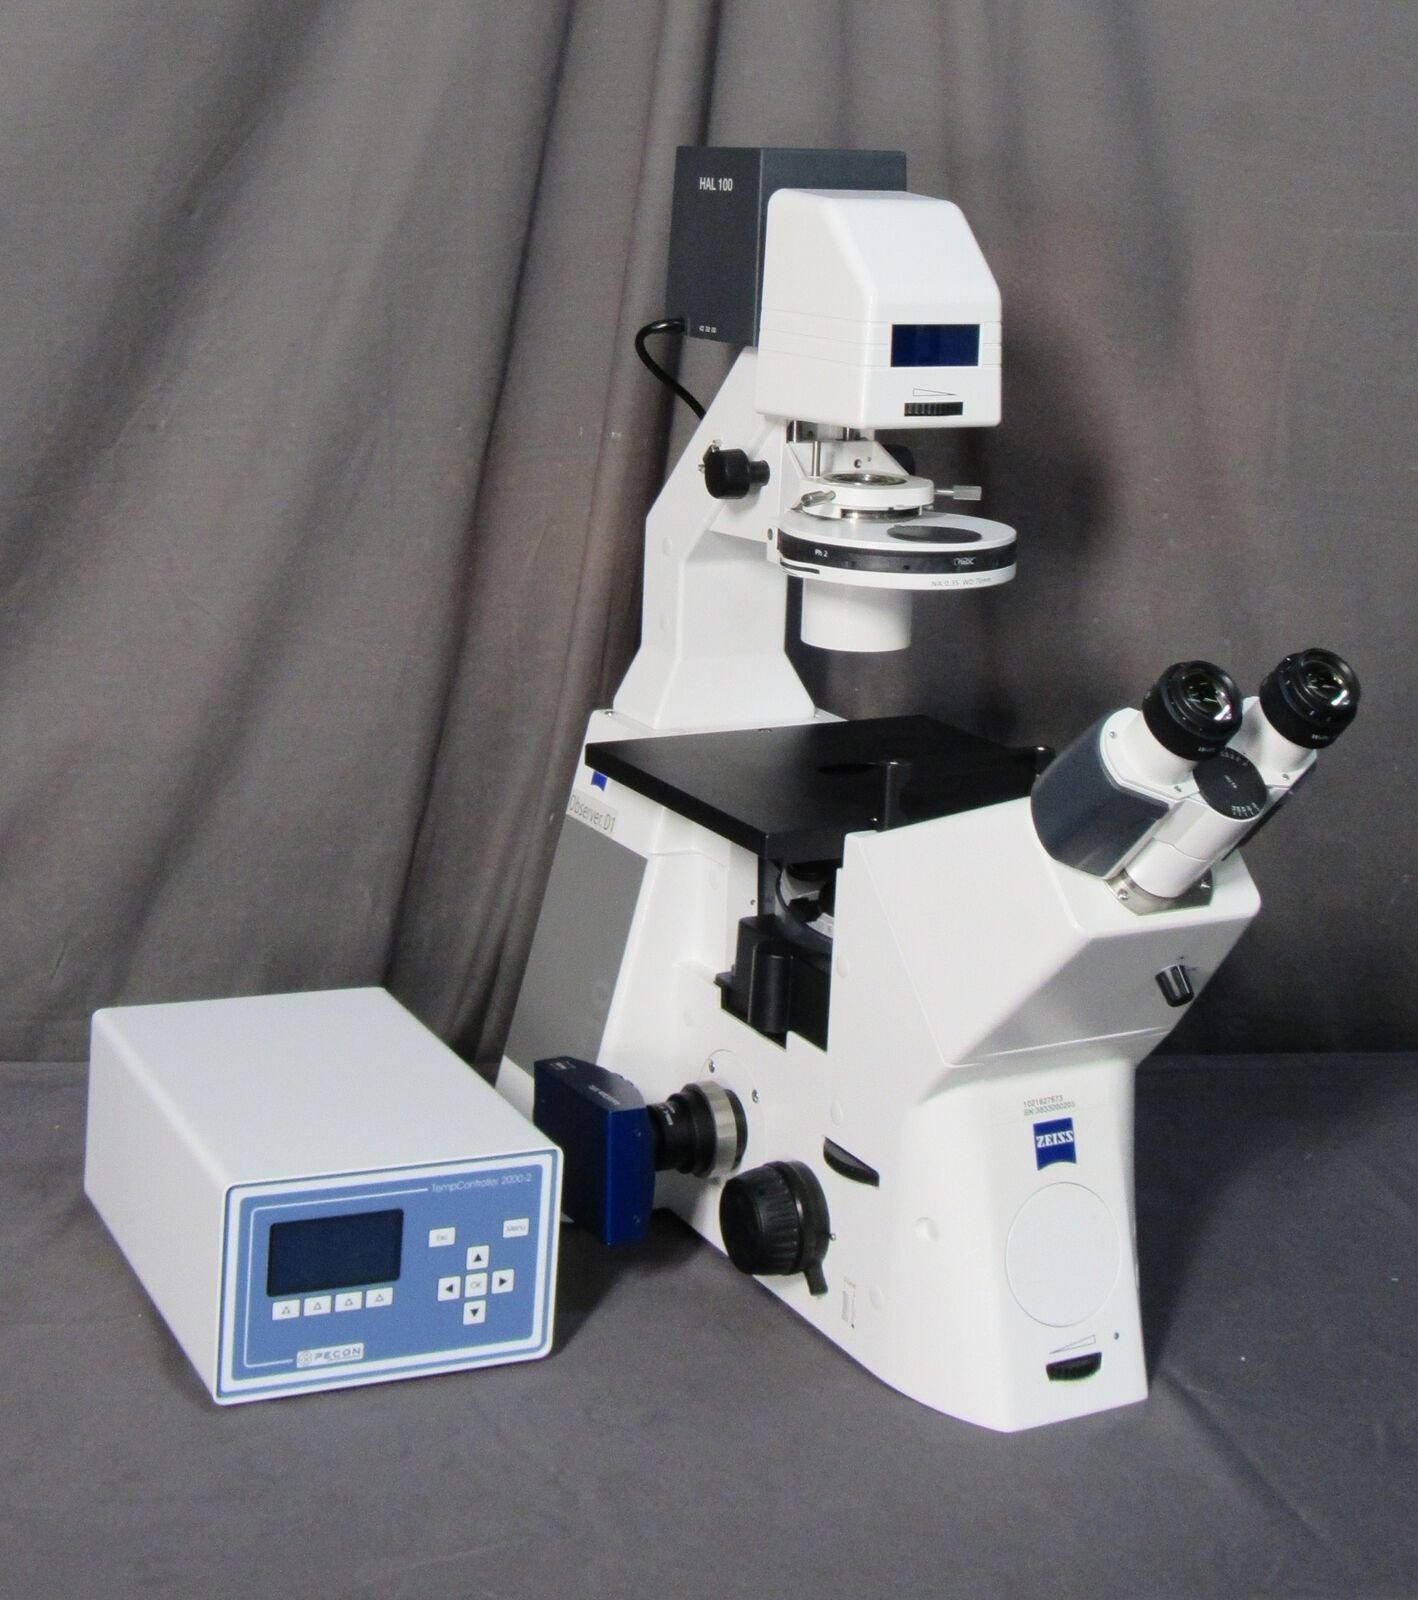 Zeiss AXIO OBSERVER.D1 DIC/Phase Contrast Inverted Fluor Microscope & Objectives